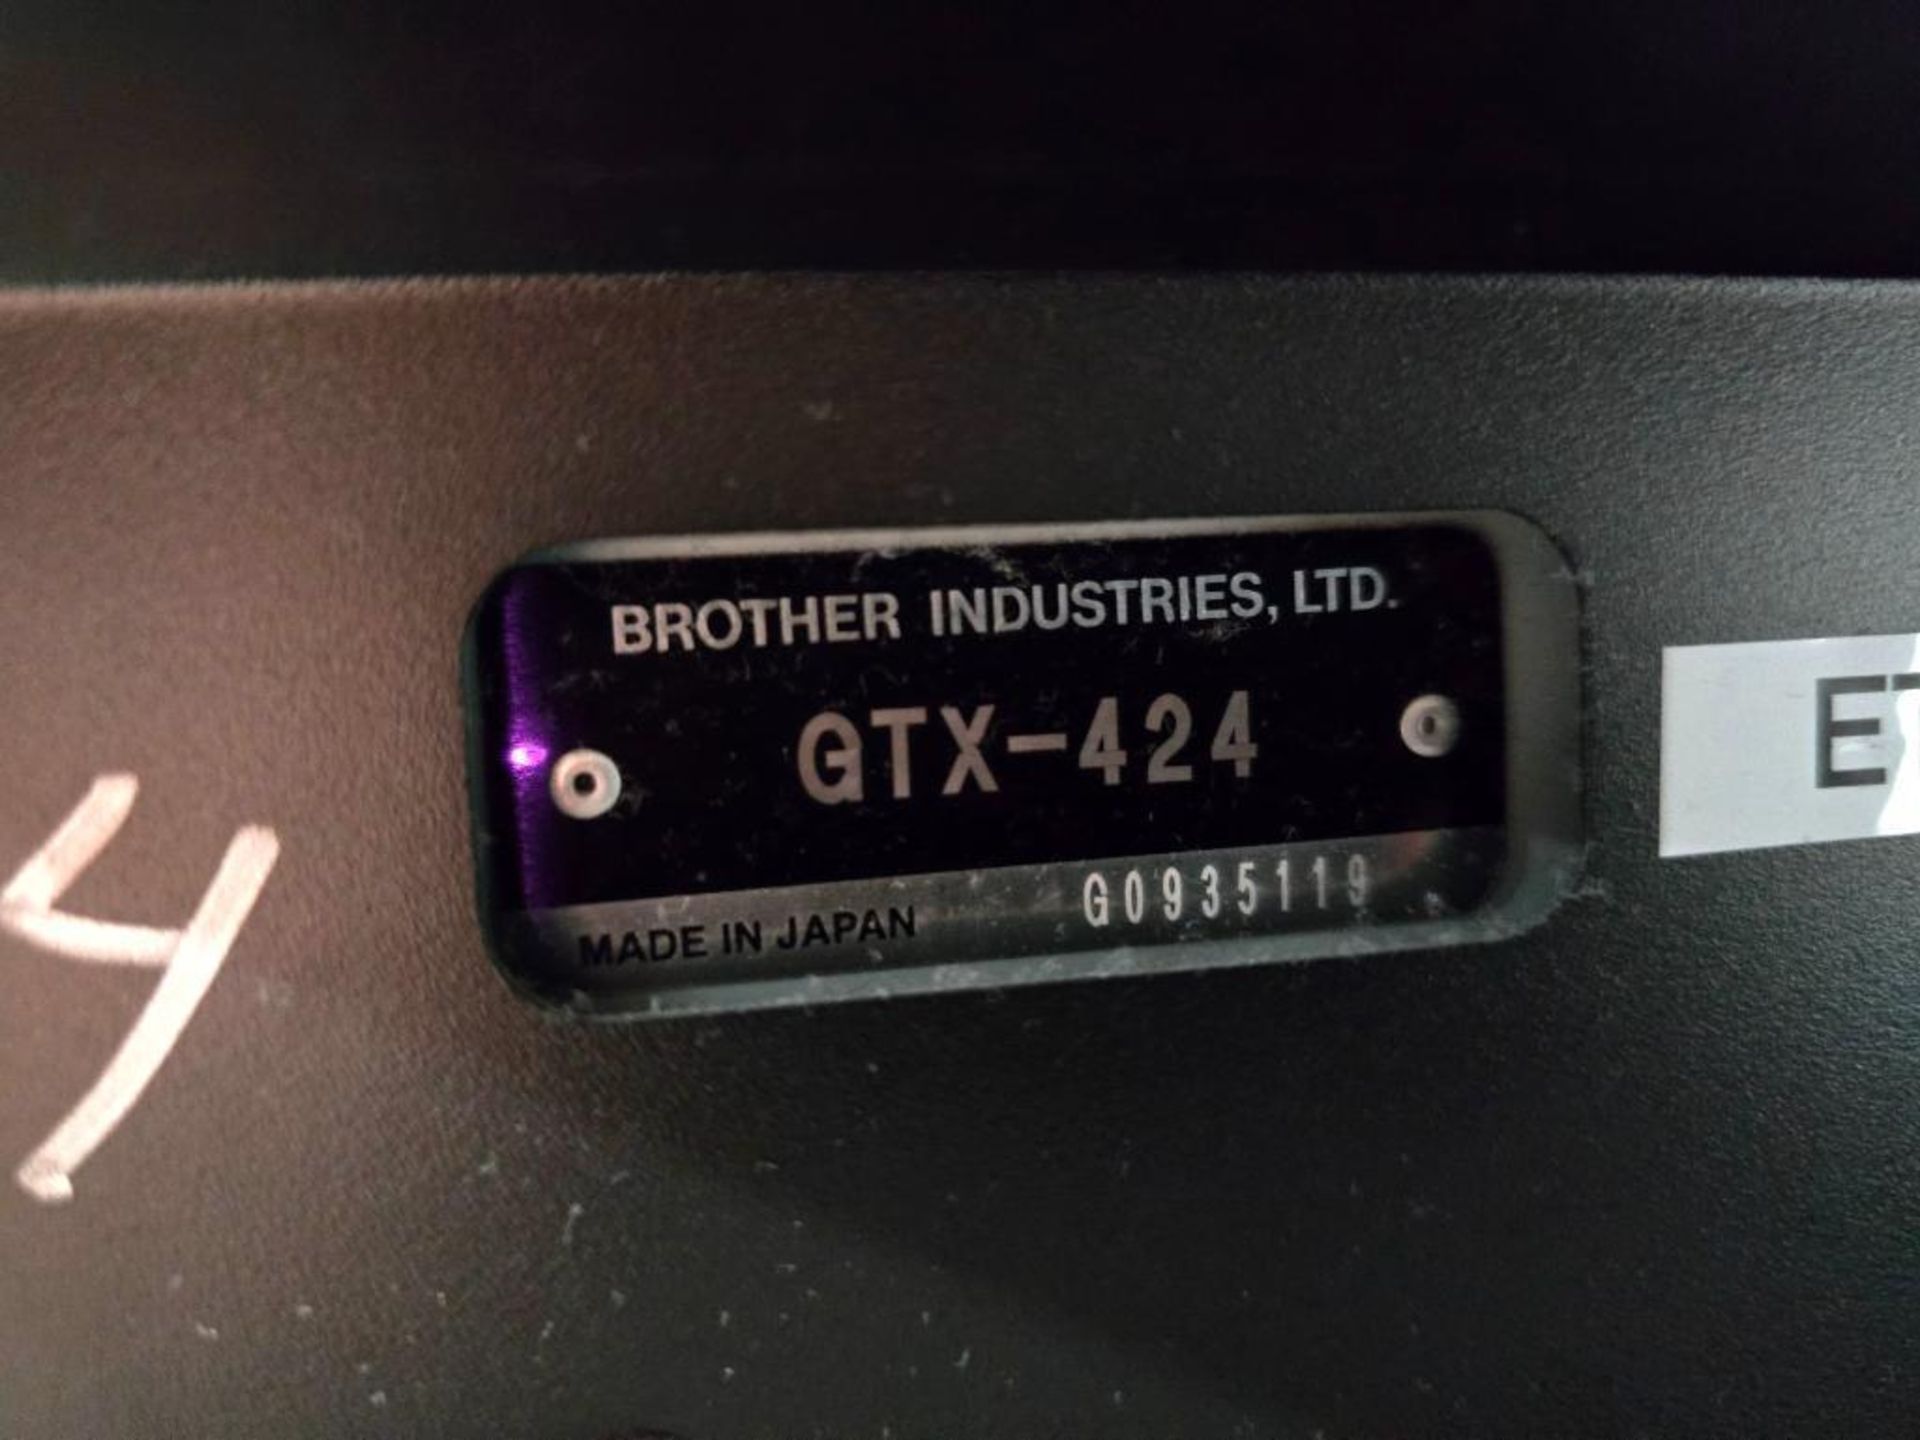 2022 Brother GTX-424 Pro-B DTG (Direct to Garment) Printer, Twin Head, 5-Color, Water Based Pigmente - Image 8 of 14